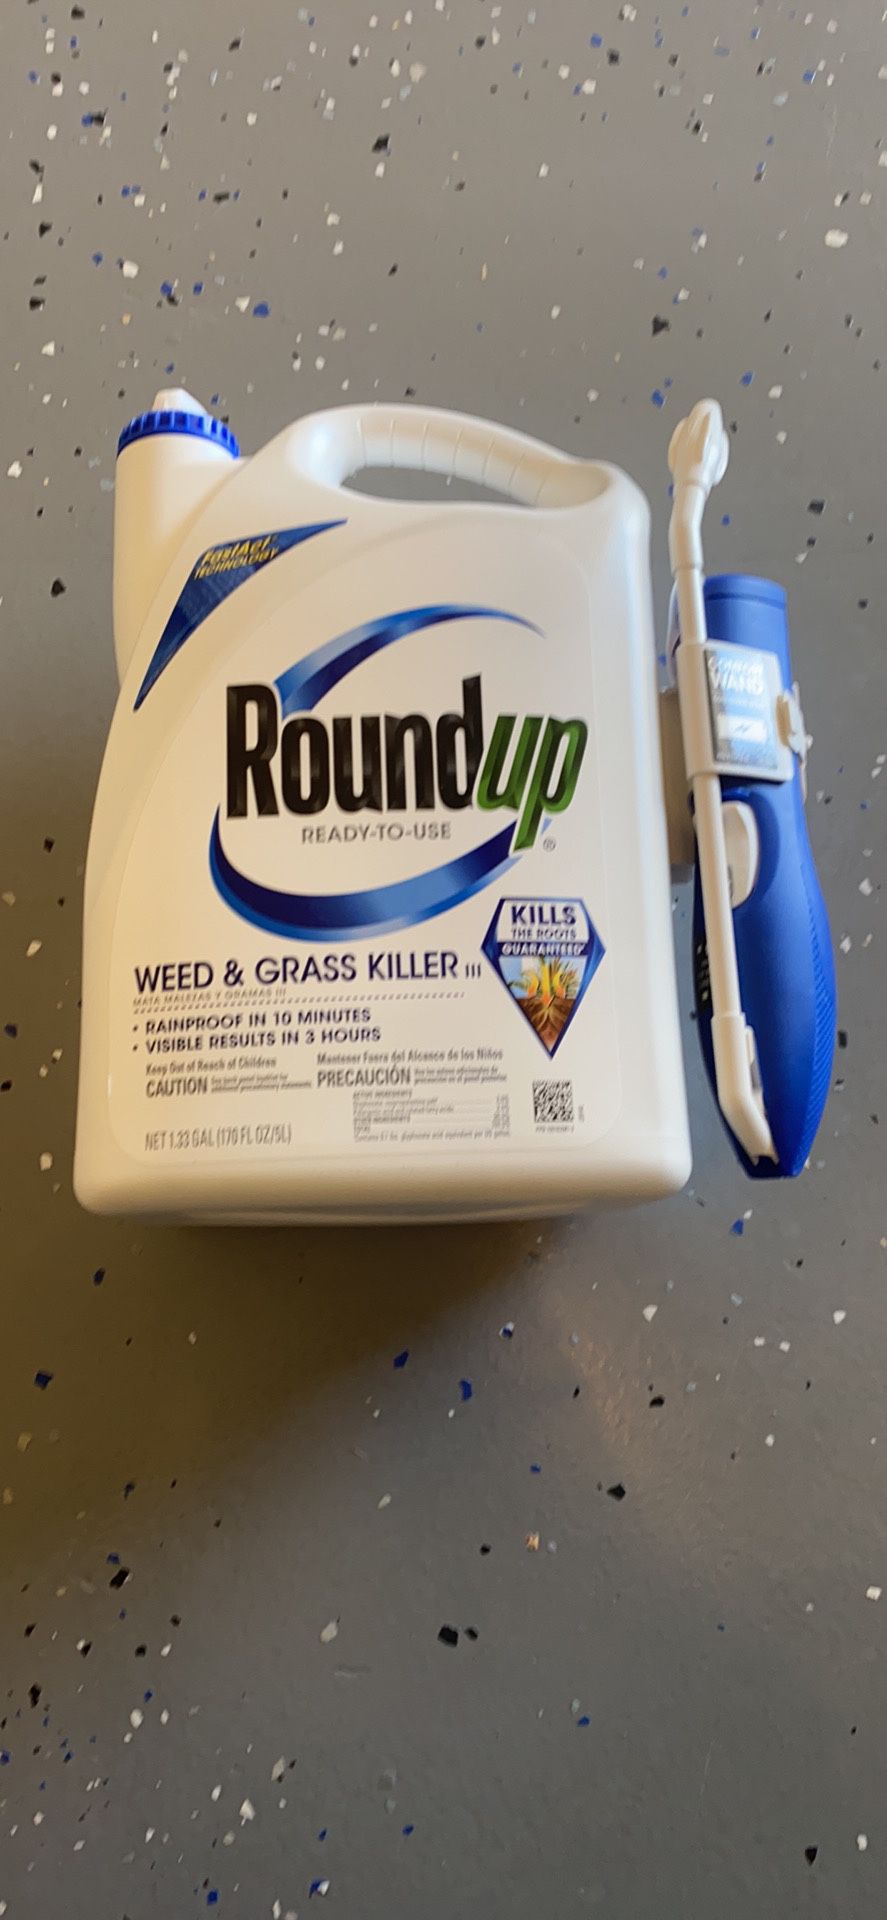 Roundup weed and grass killer